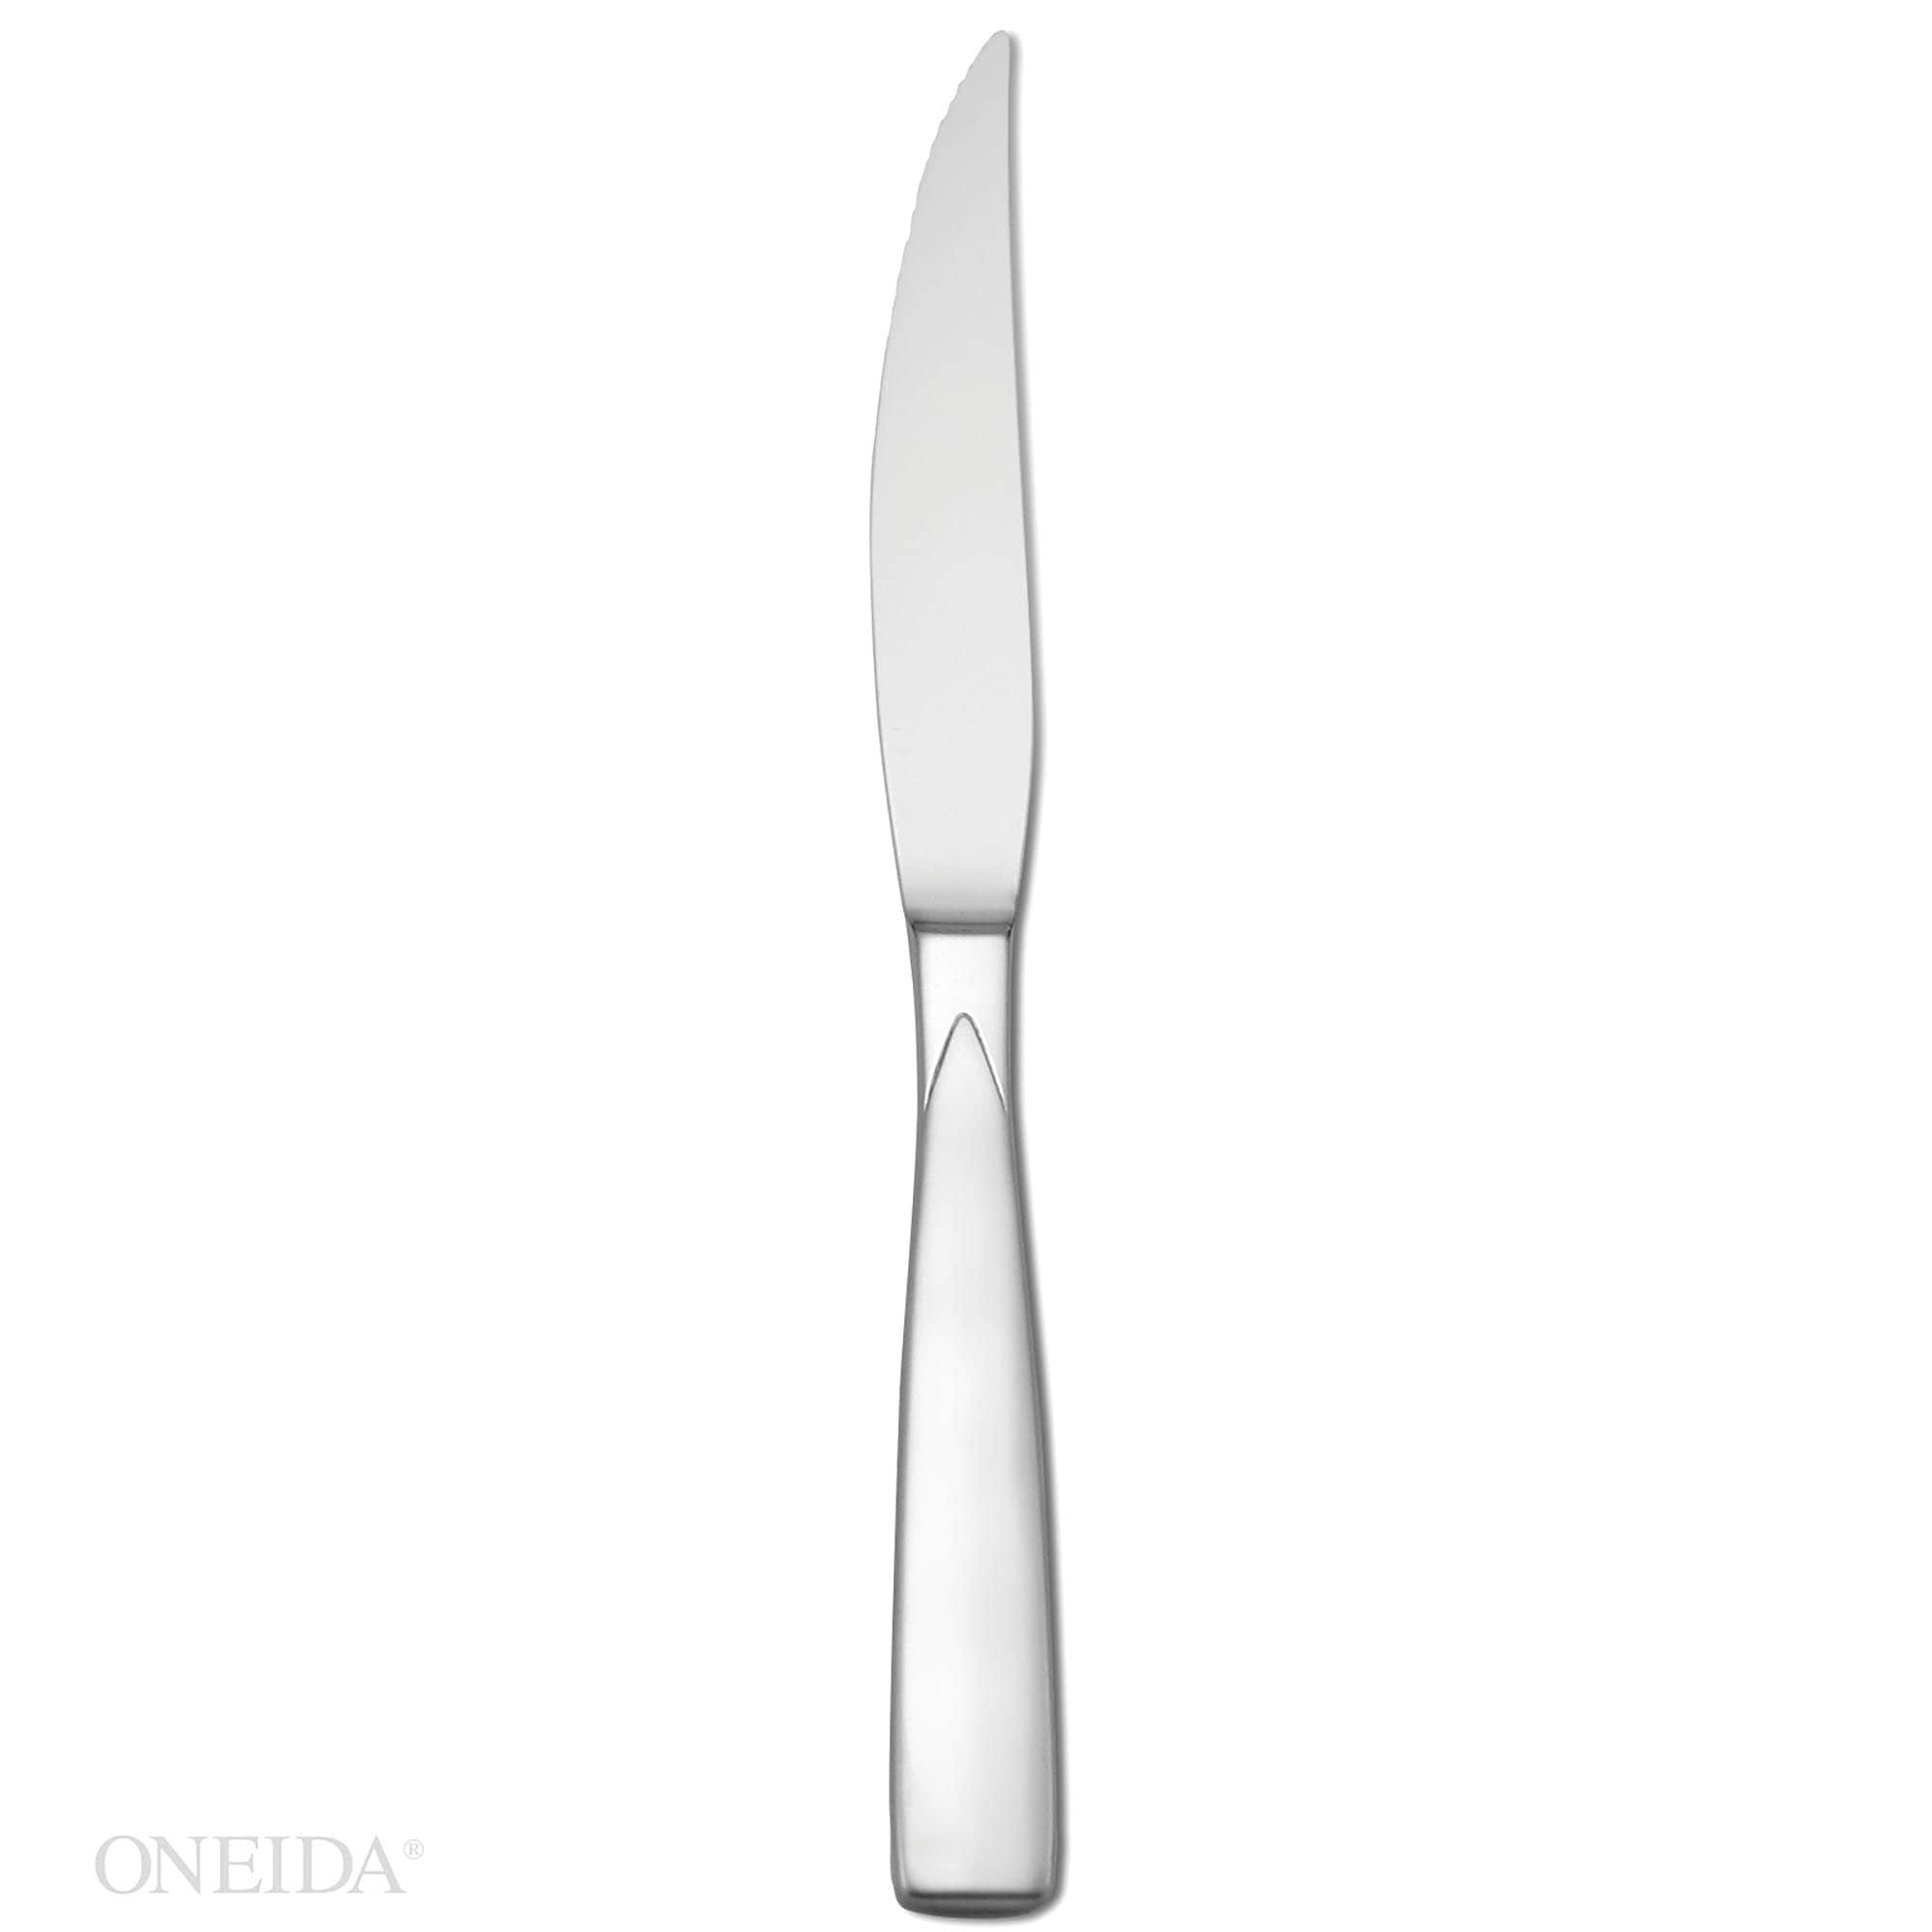 https://ak1.ostkcdn.com/images/products/is/images/direct/30ee715a843f3a8ff2e4dec236e56c0946dd5146/Oneida-18-10-Stainless-Steel-Stiletto-Steak-Knives-%28Set-of-12%29.jpg